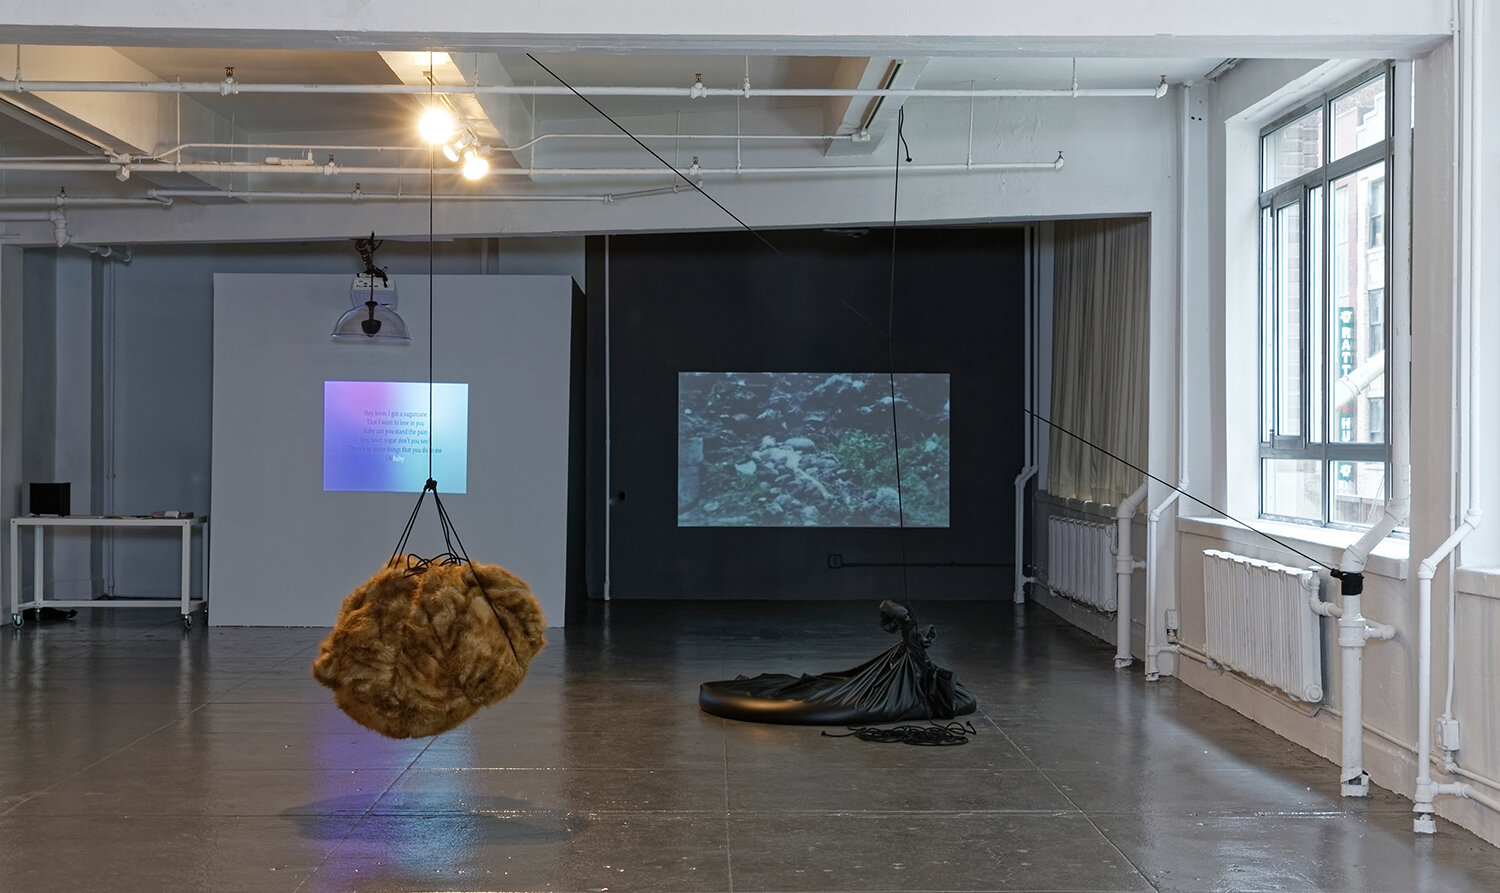  Installation view of  Soft and Wet . Works (left to right): Arooj Aftab,  Soft and Wet , 2019; Julie Tolentino,  ...soft as a lion, wet as the night , 2019; Ana Mendieta,  Burial Pyramid , 1974. Photograph by Matt Vicari 